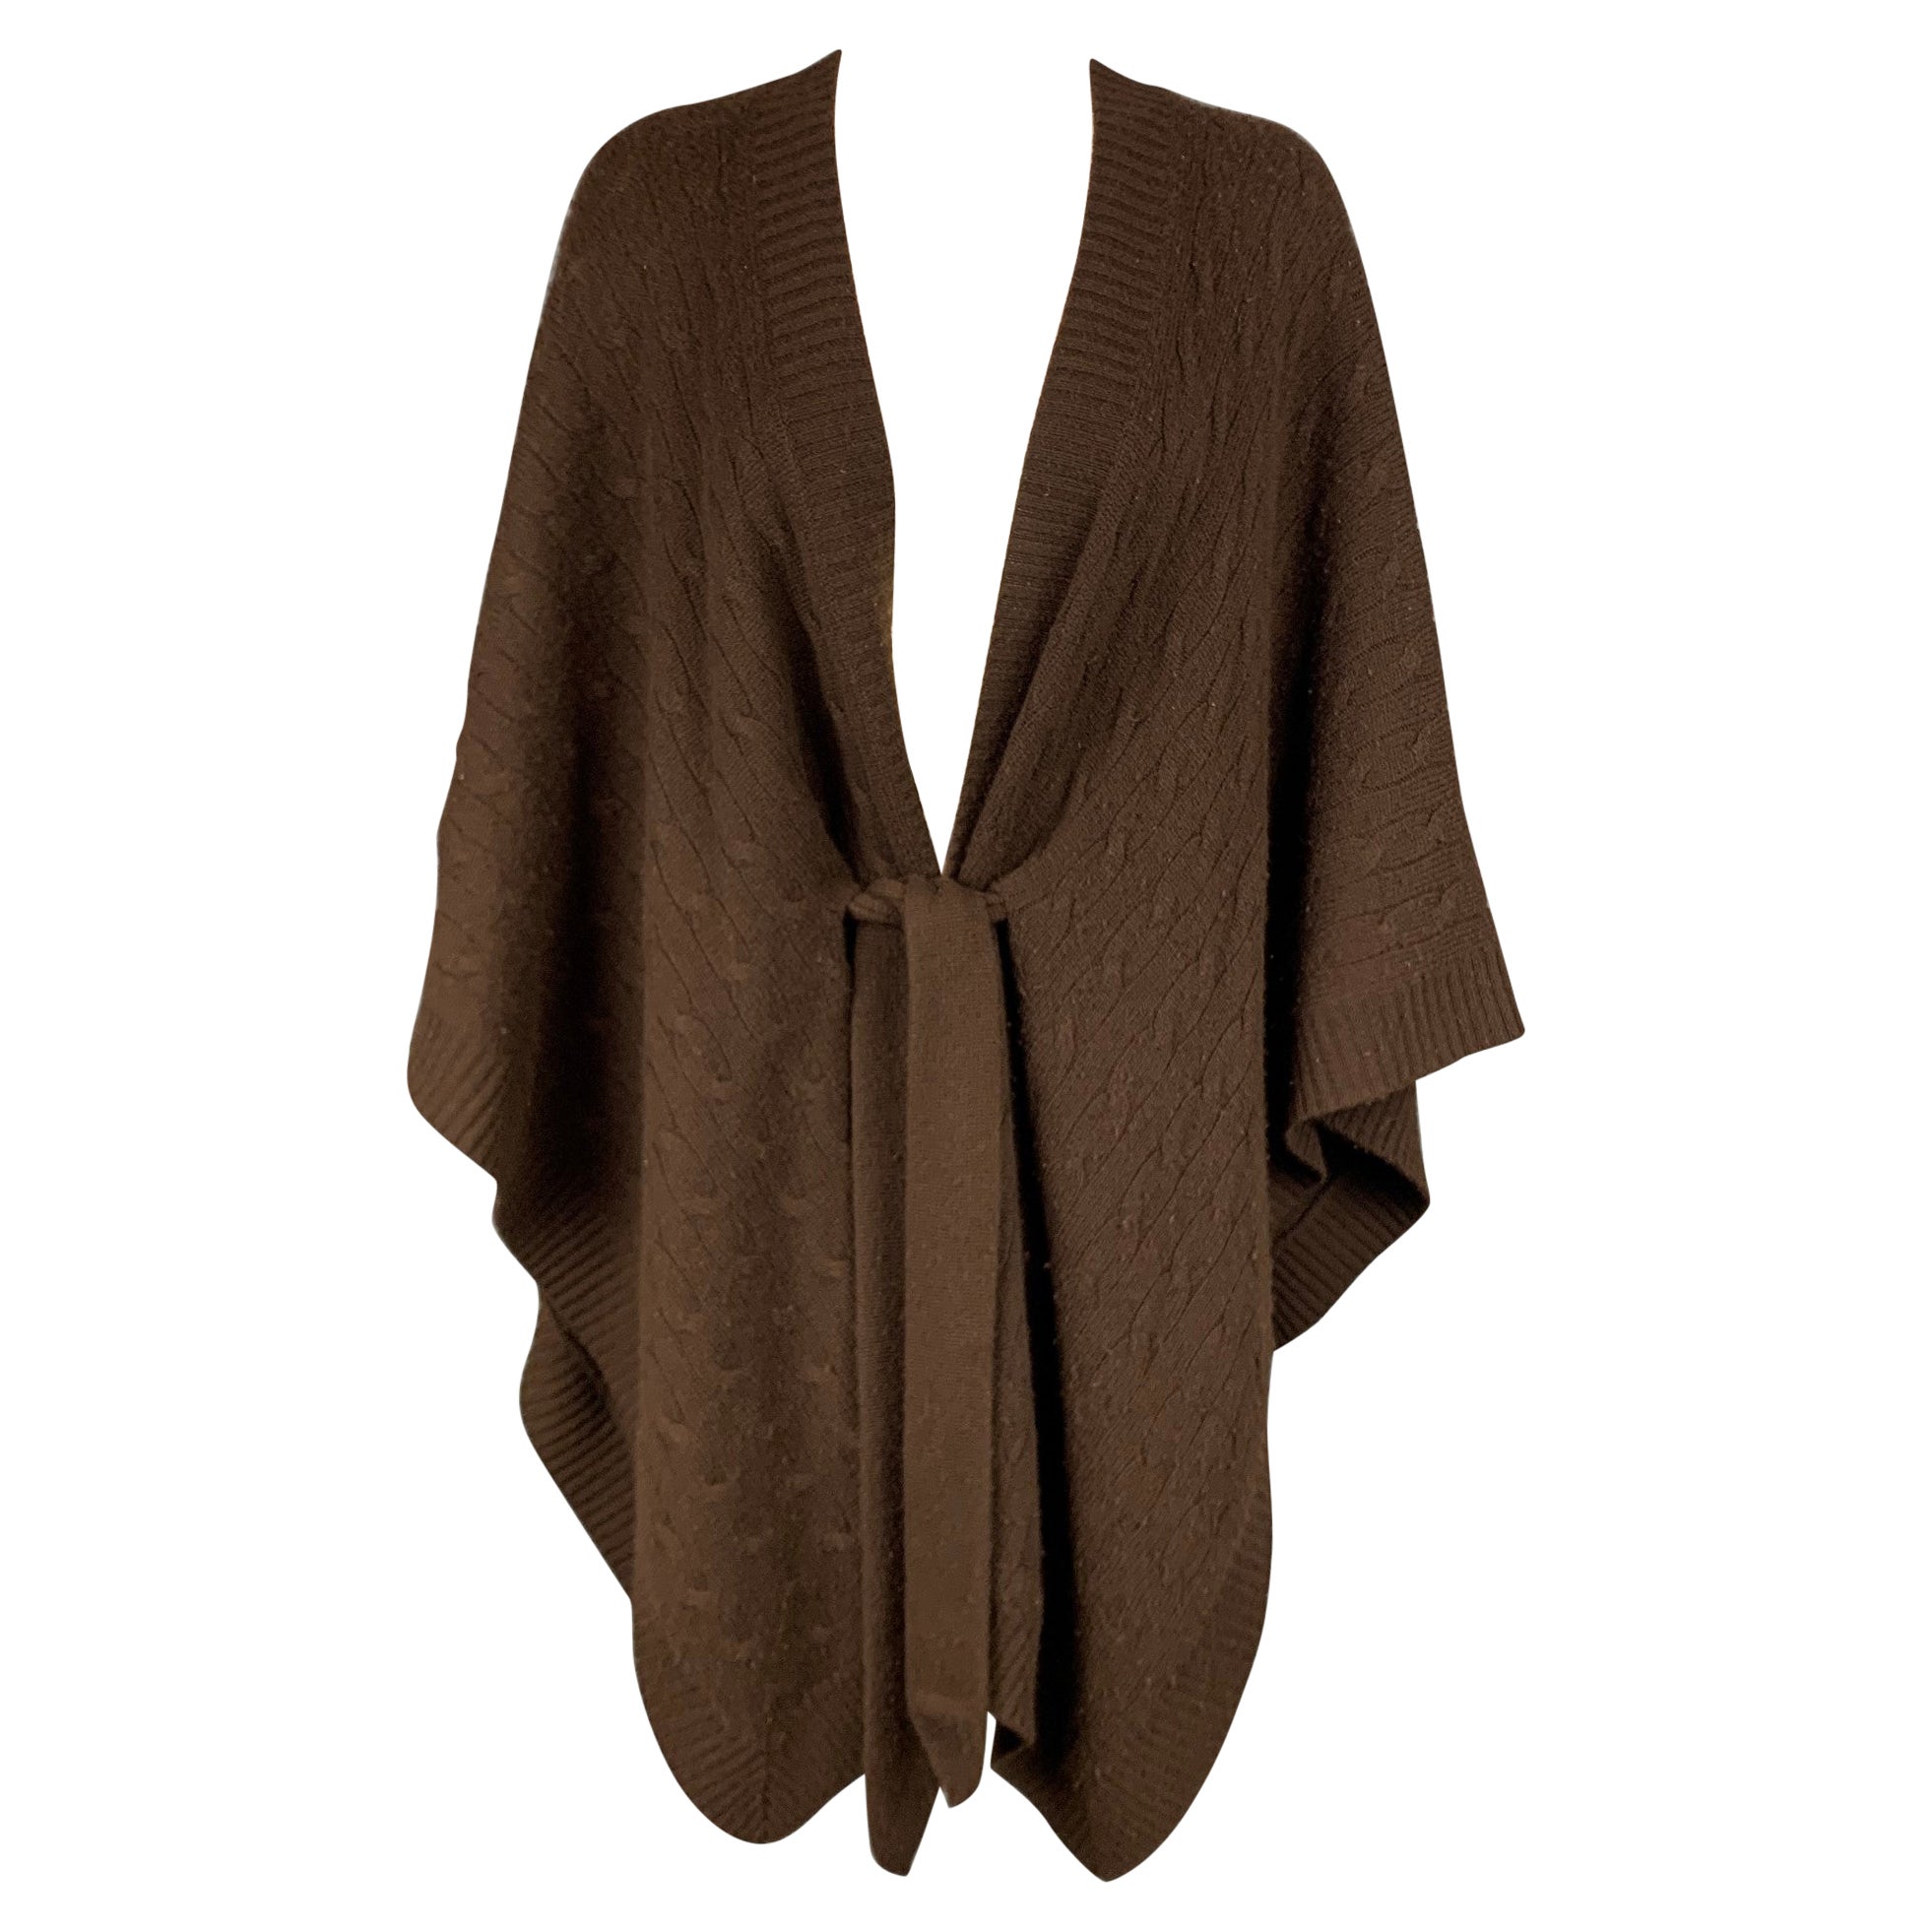 RALPH LAUREN Black Label Size M/L Brown Knitted Cashmere Belted Poncho Cardigan